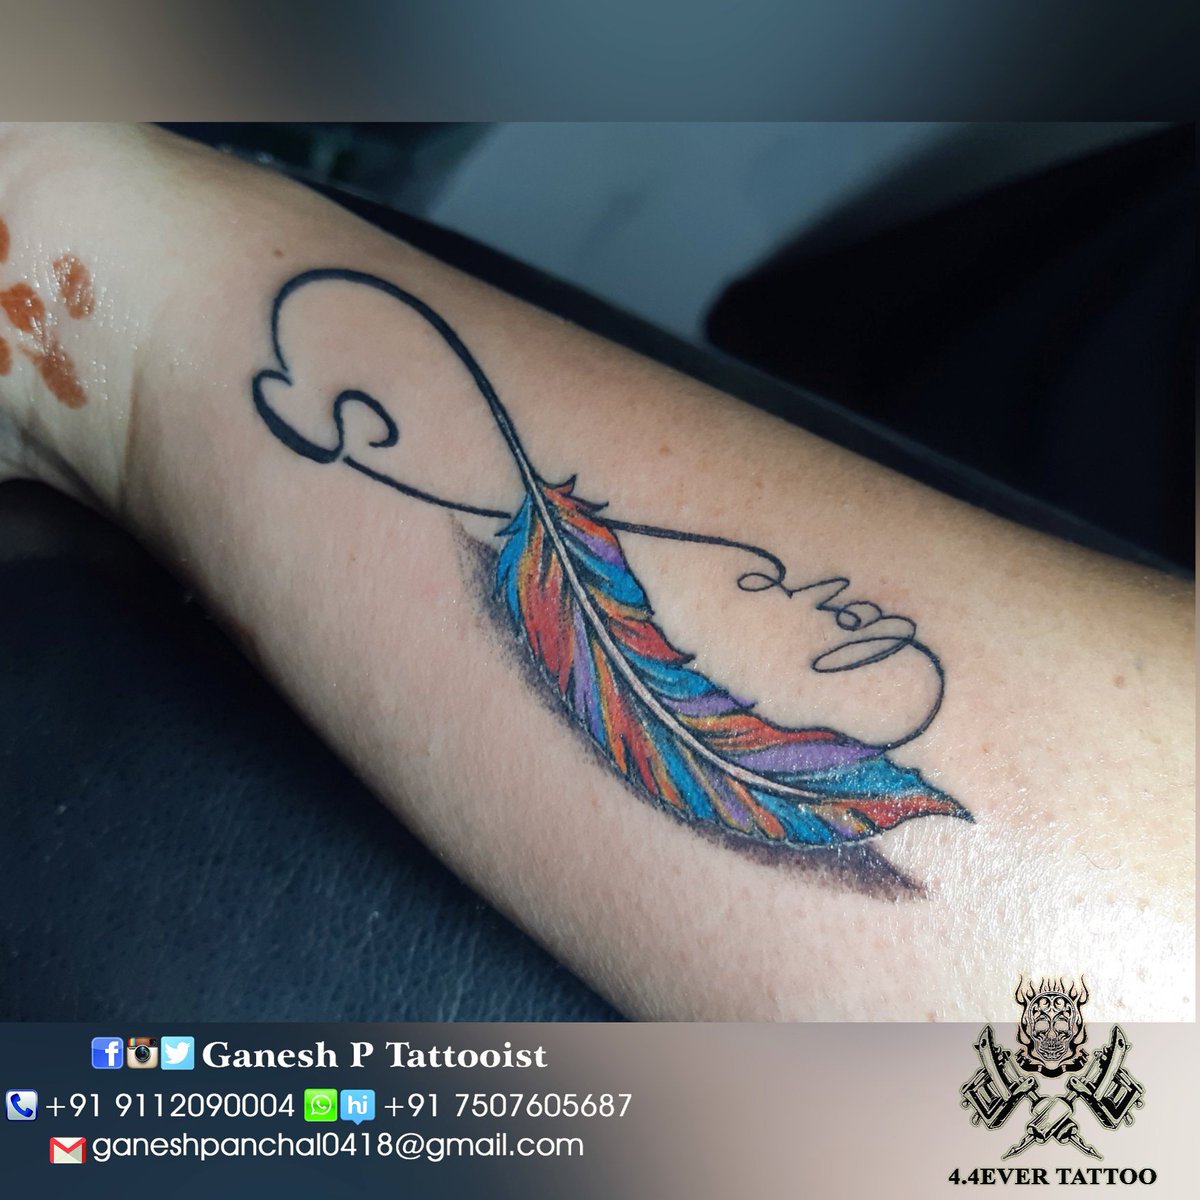 Ganesh P Tattooist on Twitter butterflytattoo star infinitytattoo  infinity tattoo By Ganesh Panchal tattooist hopeyoulike my work  colourful call for tattoos in nanded nandedcity nandedmodels  tattooed love tattoos photo 